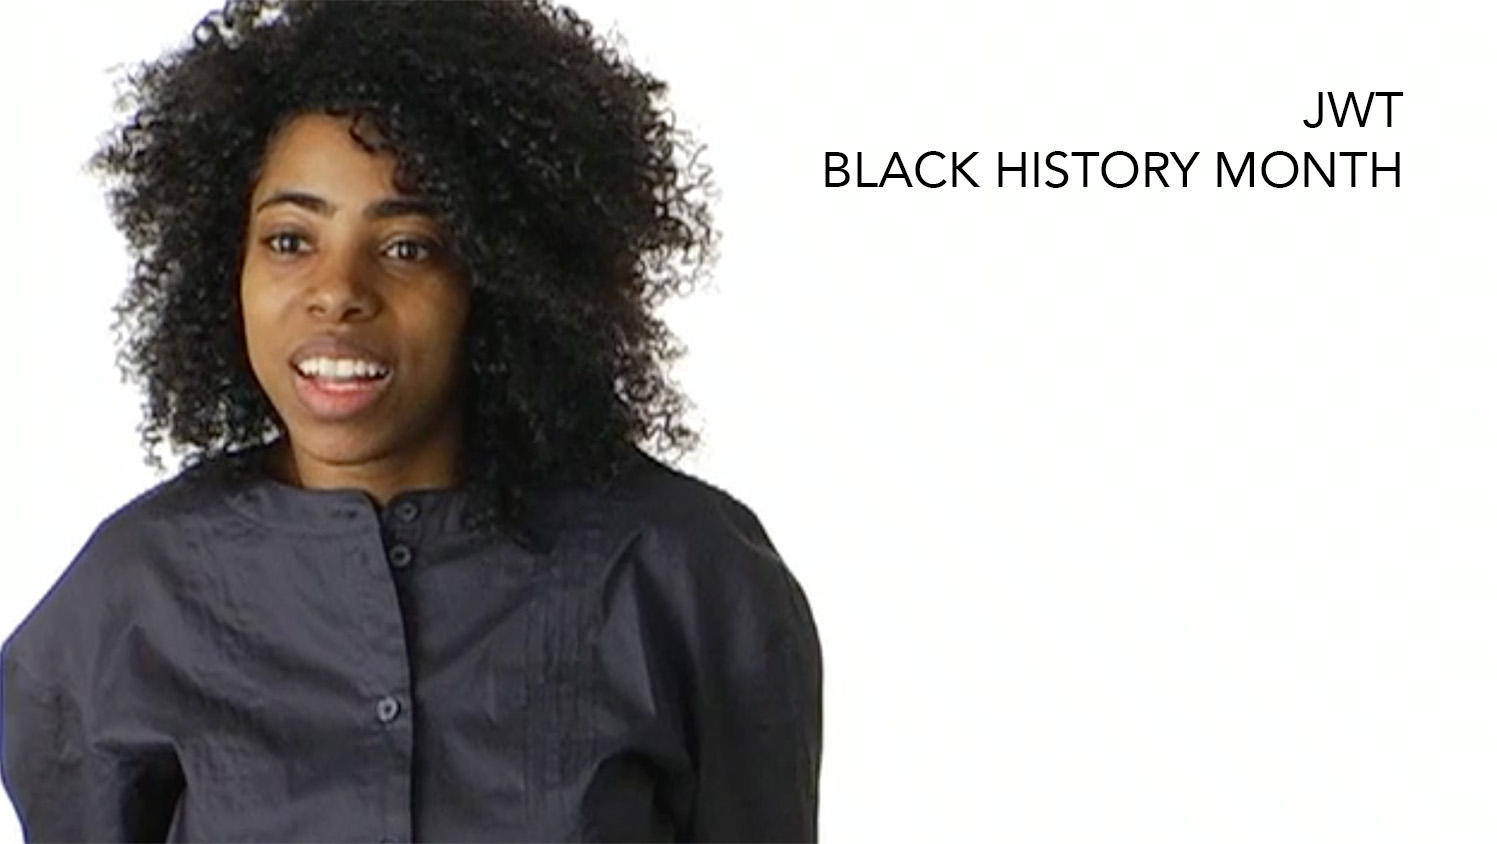 jwt_black_history_month_for_gallery.jpg